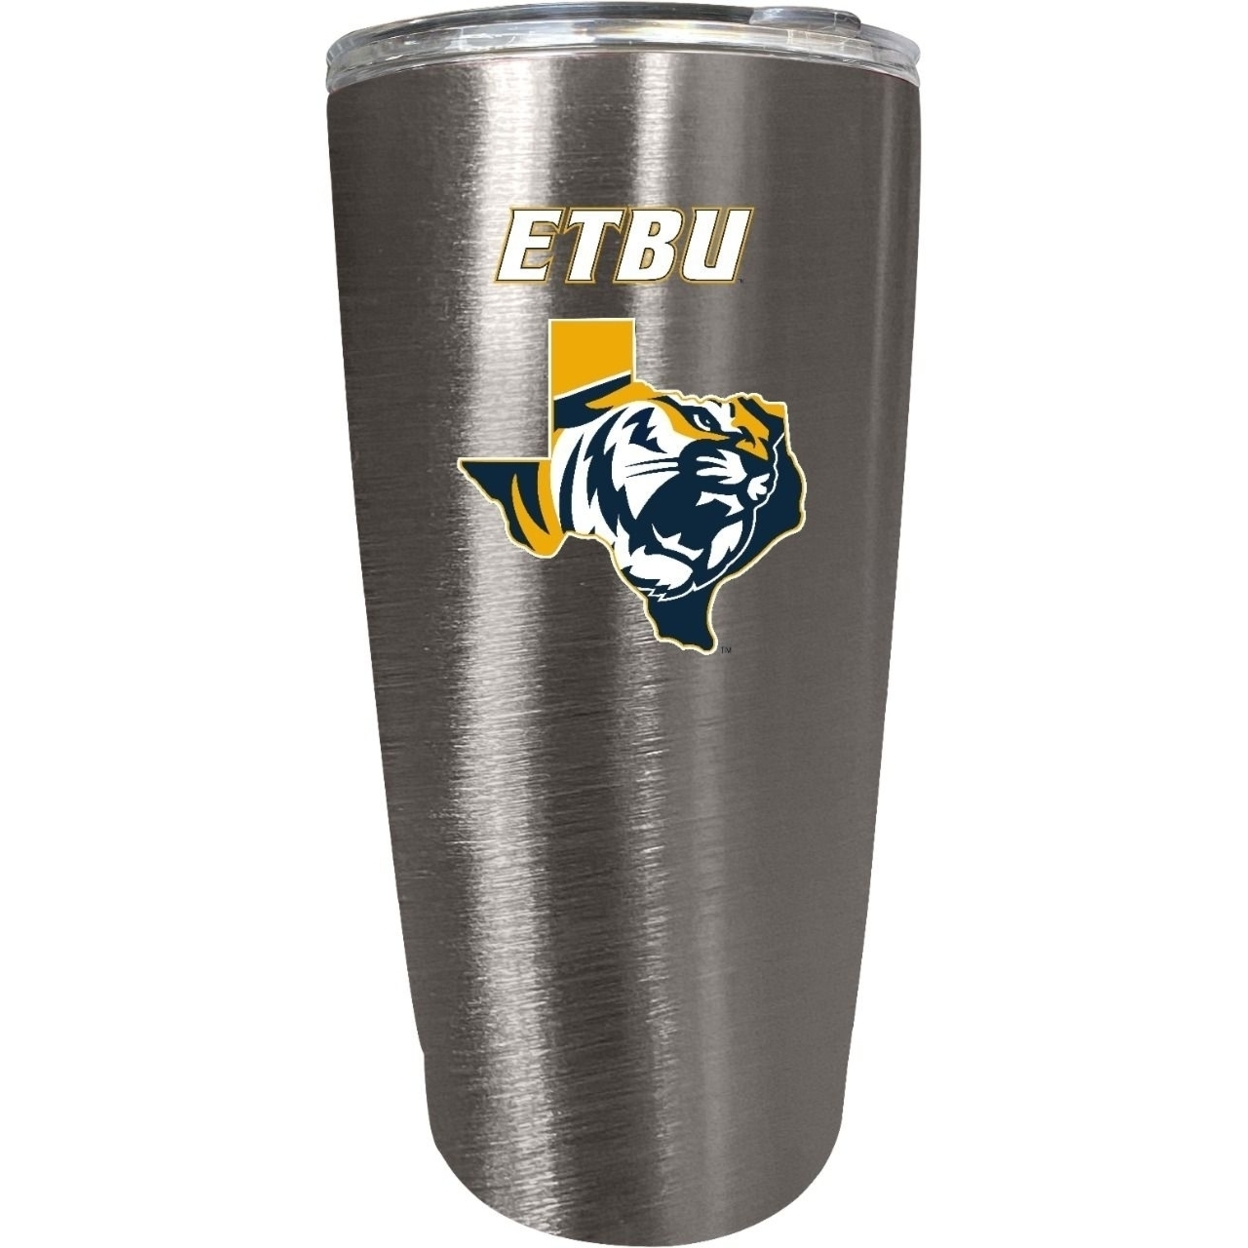 East Texas Baptist University 16 Oz Insulated Stainless Steel Tumbler Colorless